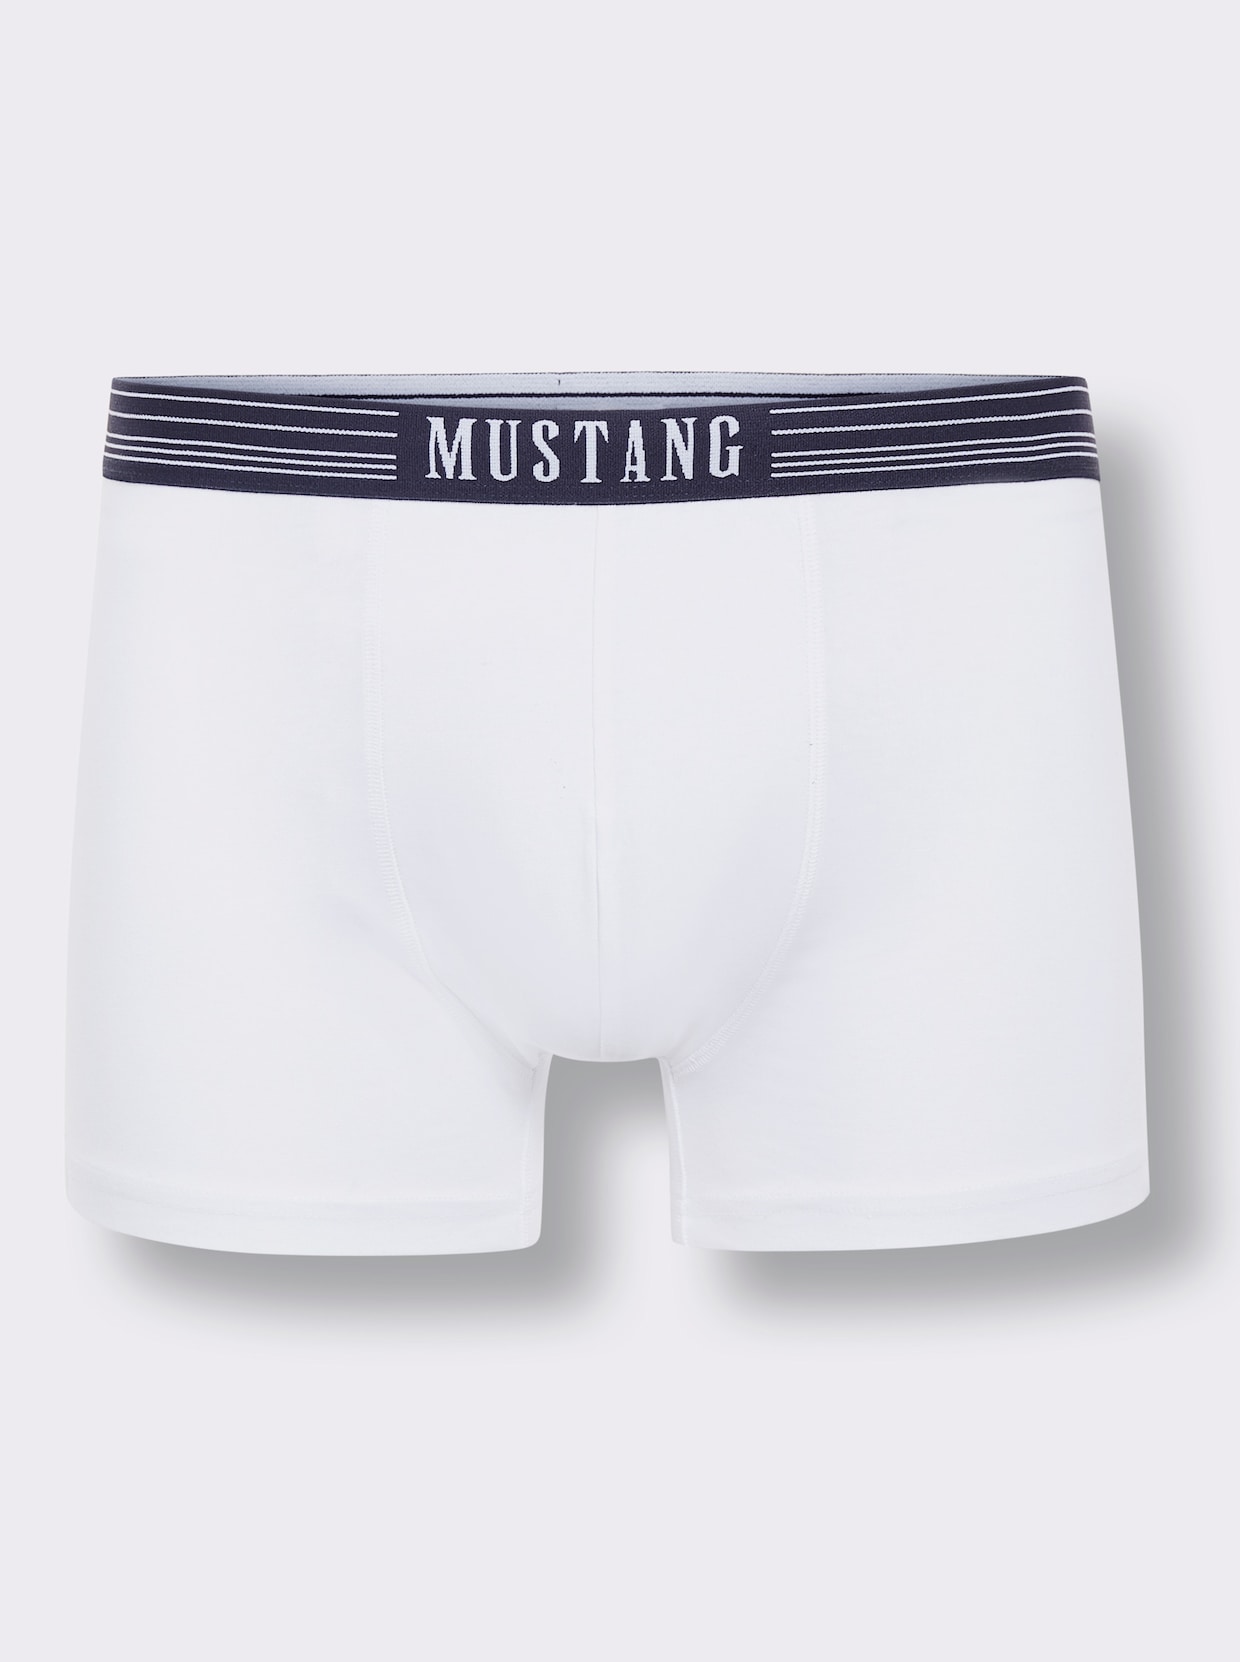 Mustang Pants - marine + weiss + rot